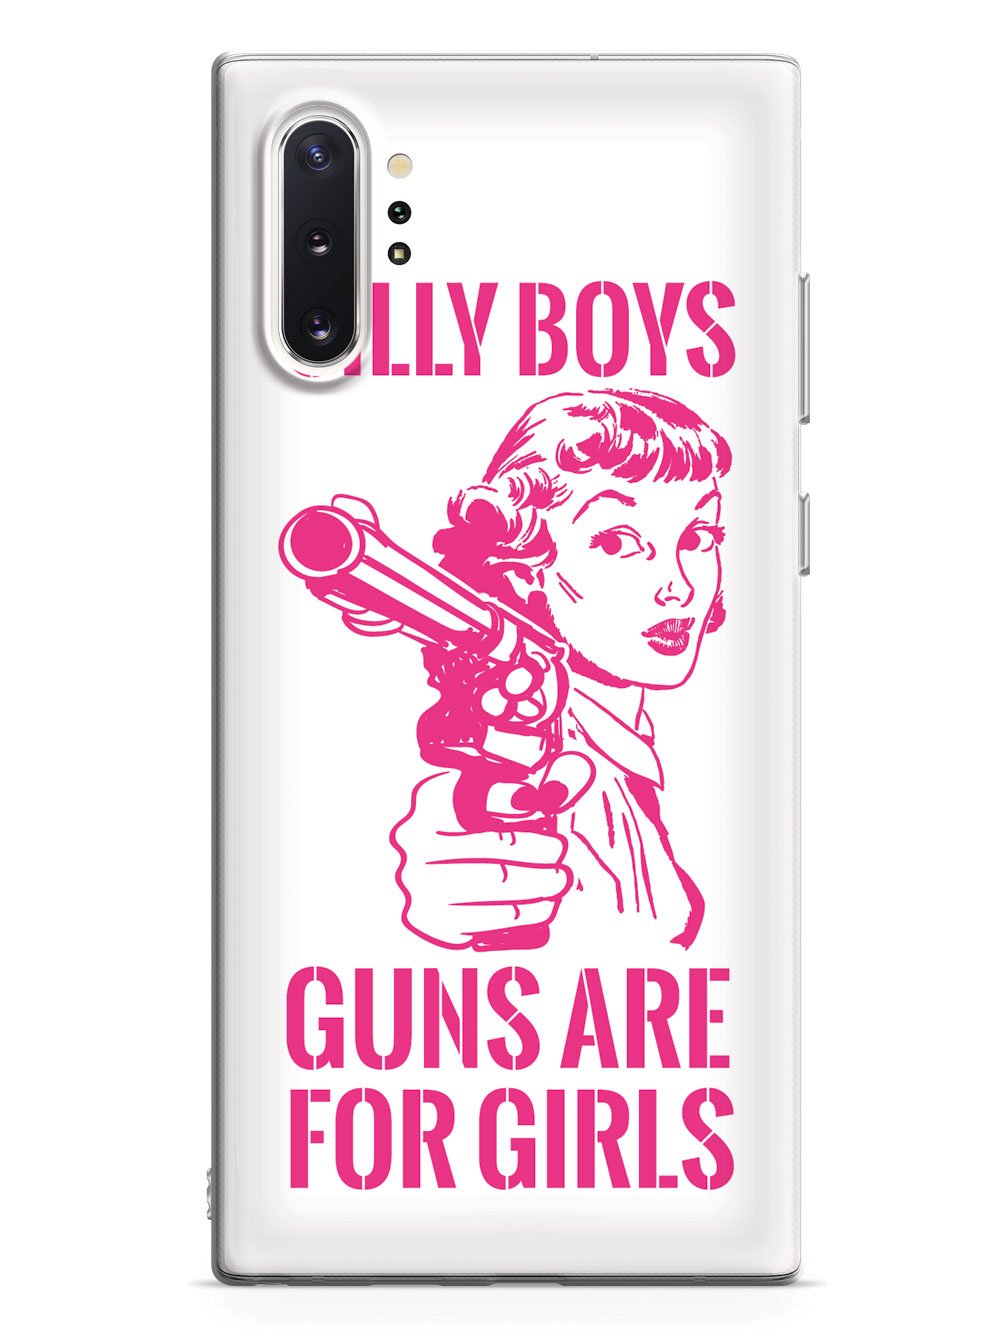 Silly Boys, Guns are for Girls - Pink Text Case